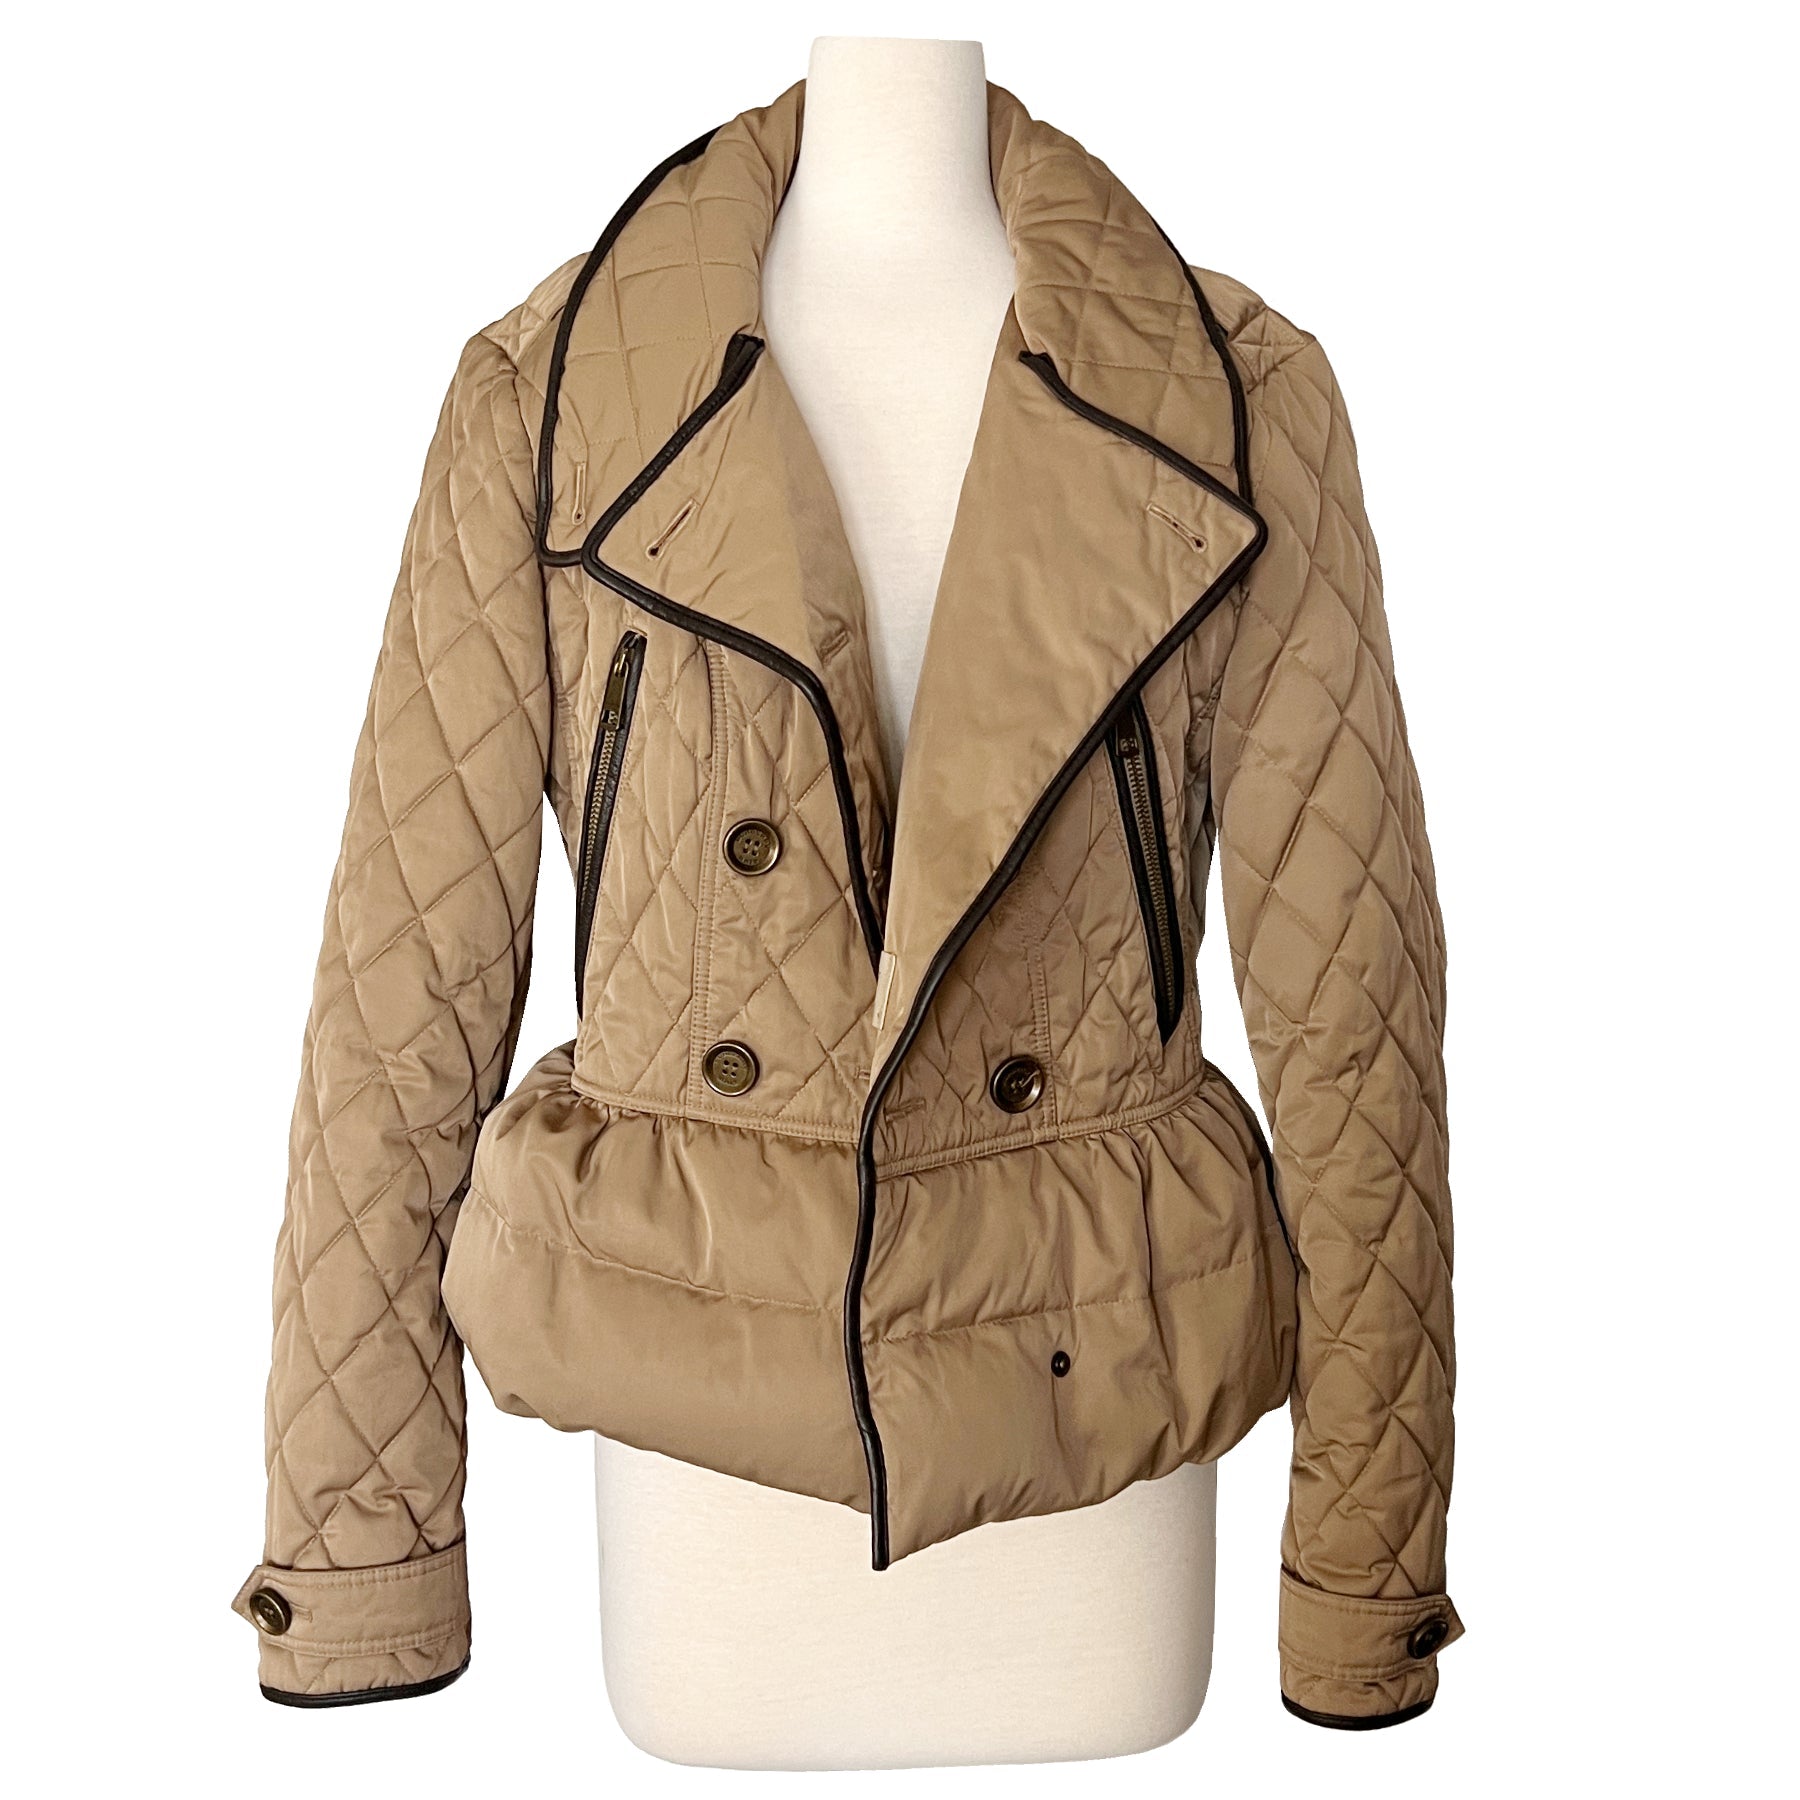 Burberry Brit Tan Khaki Leather Trim Quilted Puffer Double Breasted Jacket Coat